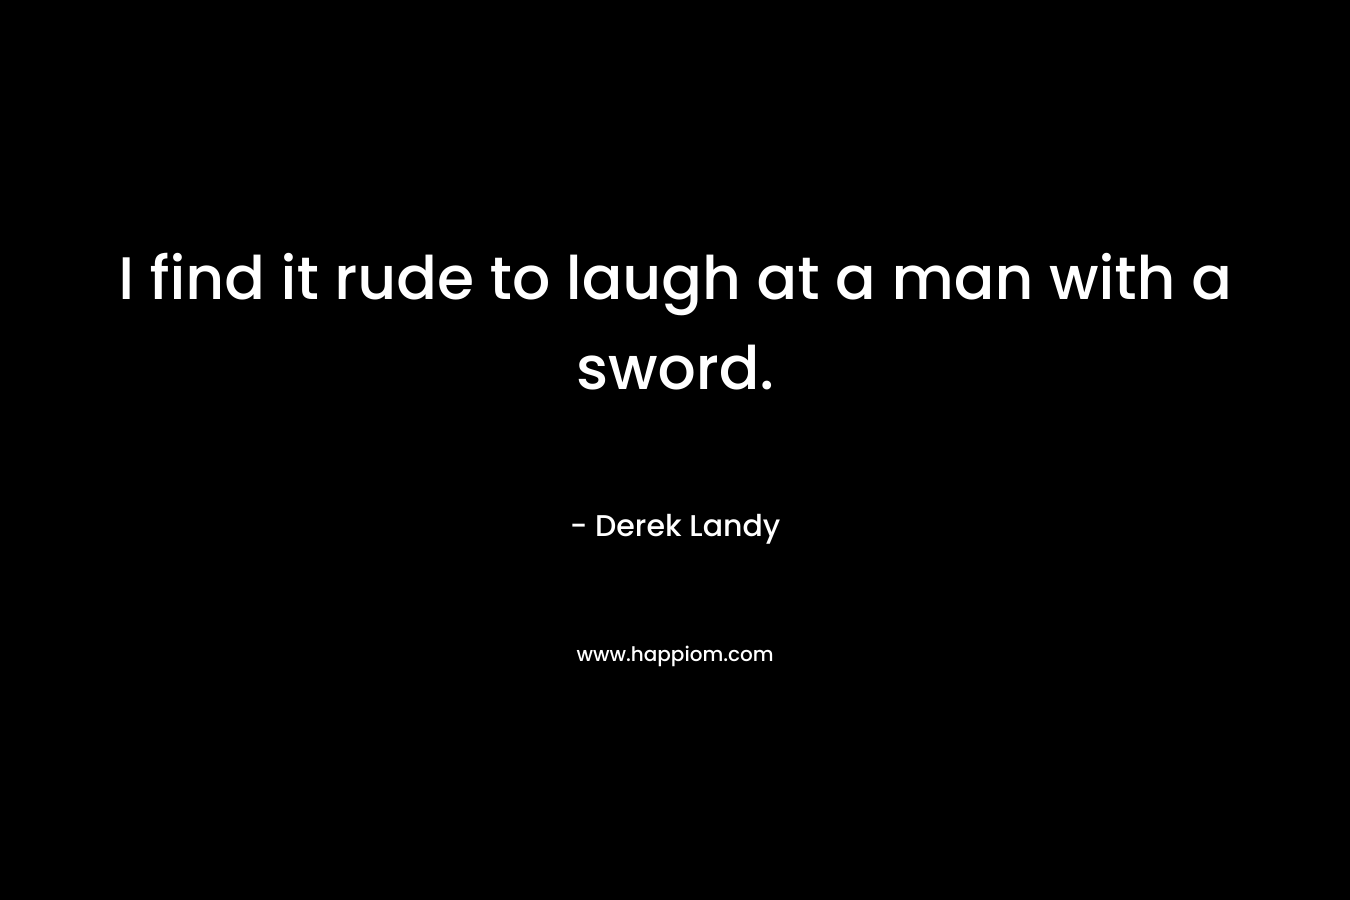 I find it rude to laugh at a man with a sword.